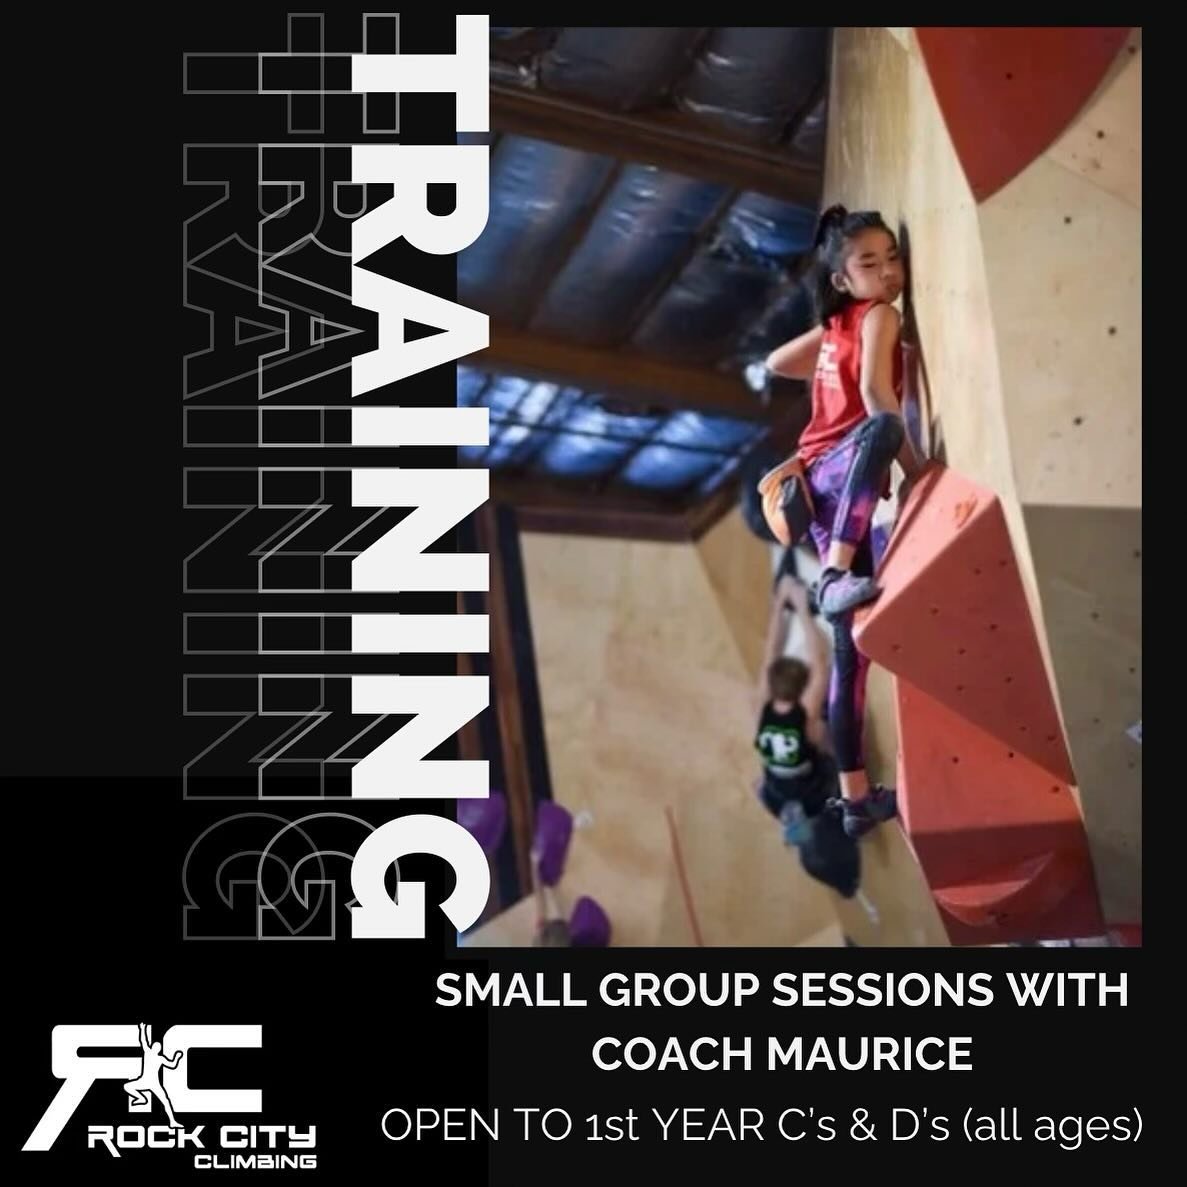 Starting Tuesday April 9! Small Group Training Sessions for 1st Year C&rsquo;s and D&rsquo;s of all ages, 6 climbers maximum per-session. Sessions will run 90 minutes and include guided warm-up time. Sign-up link coming soon!